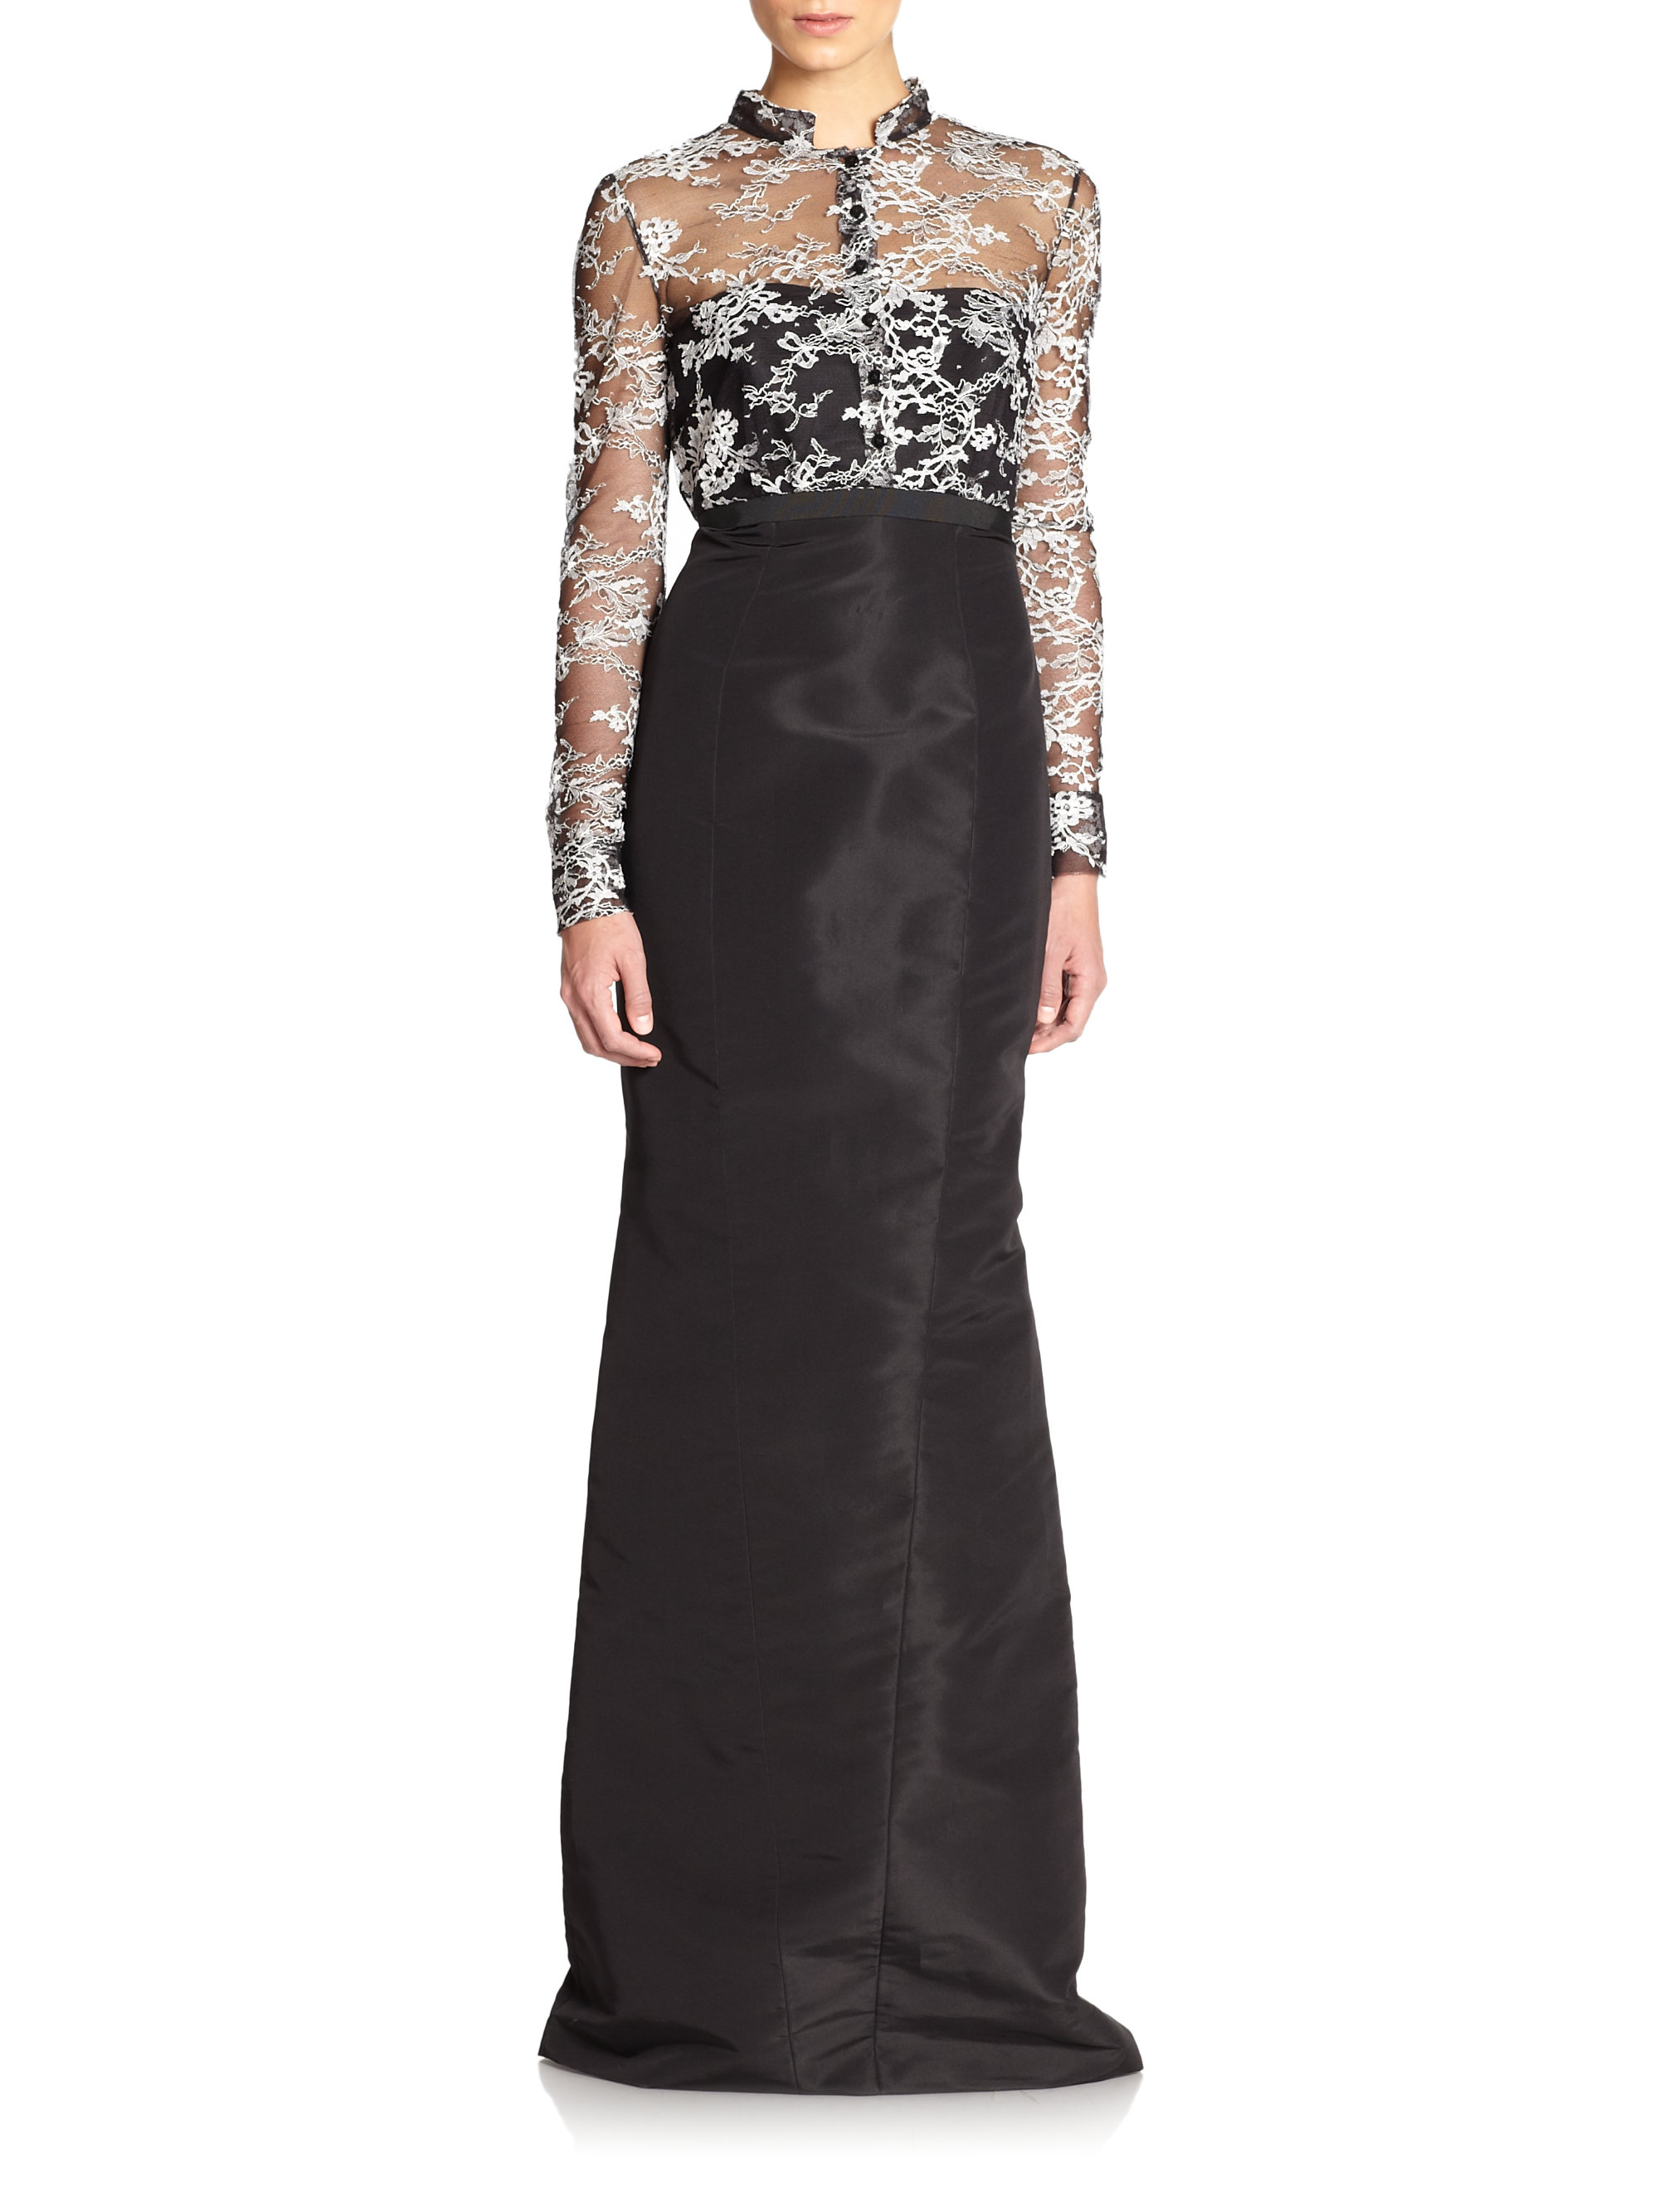 Carolina Herrera Laceoverlay Evening Gown in Black | Lyst